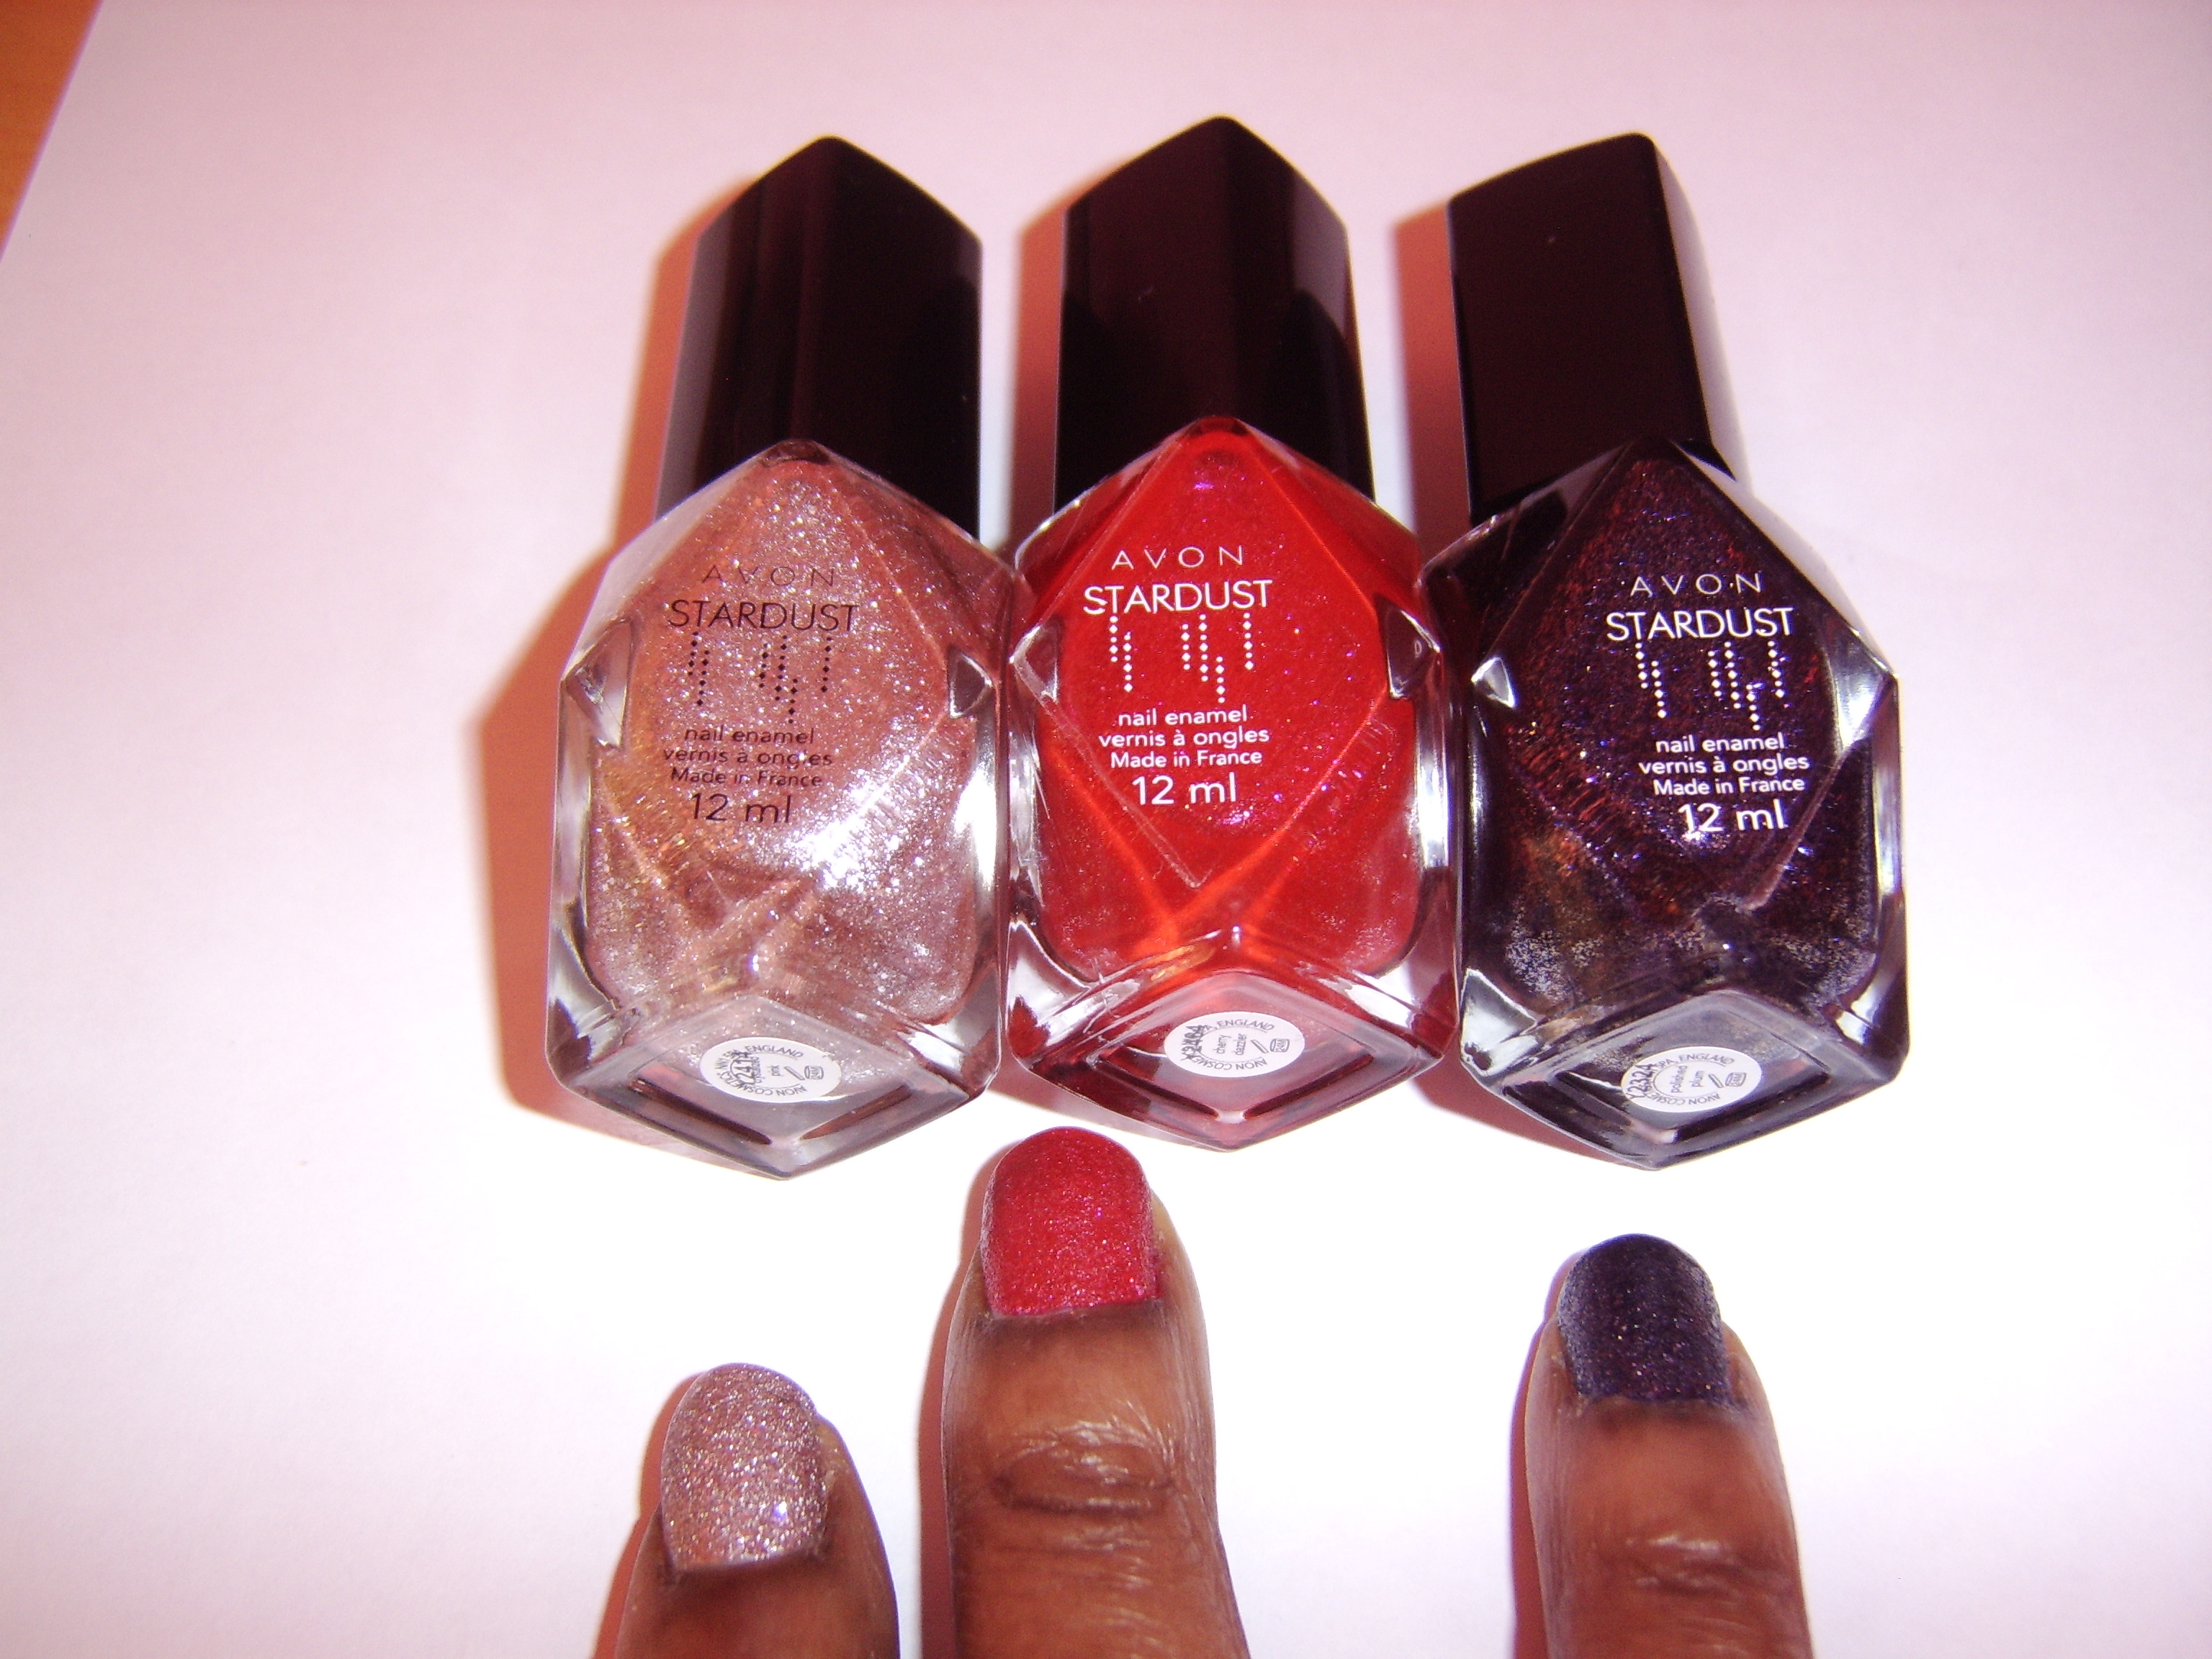 Left to right - Crystalized Pink, Cherry Sparkle, Polished Plum